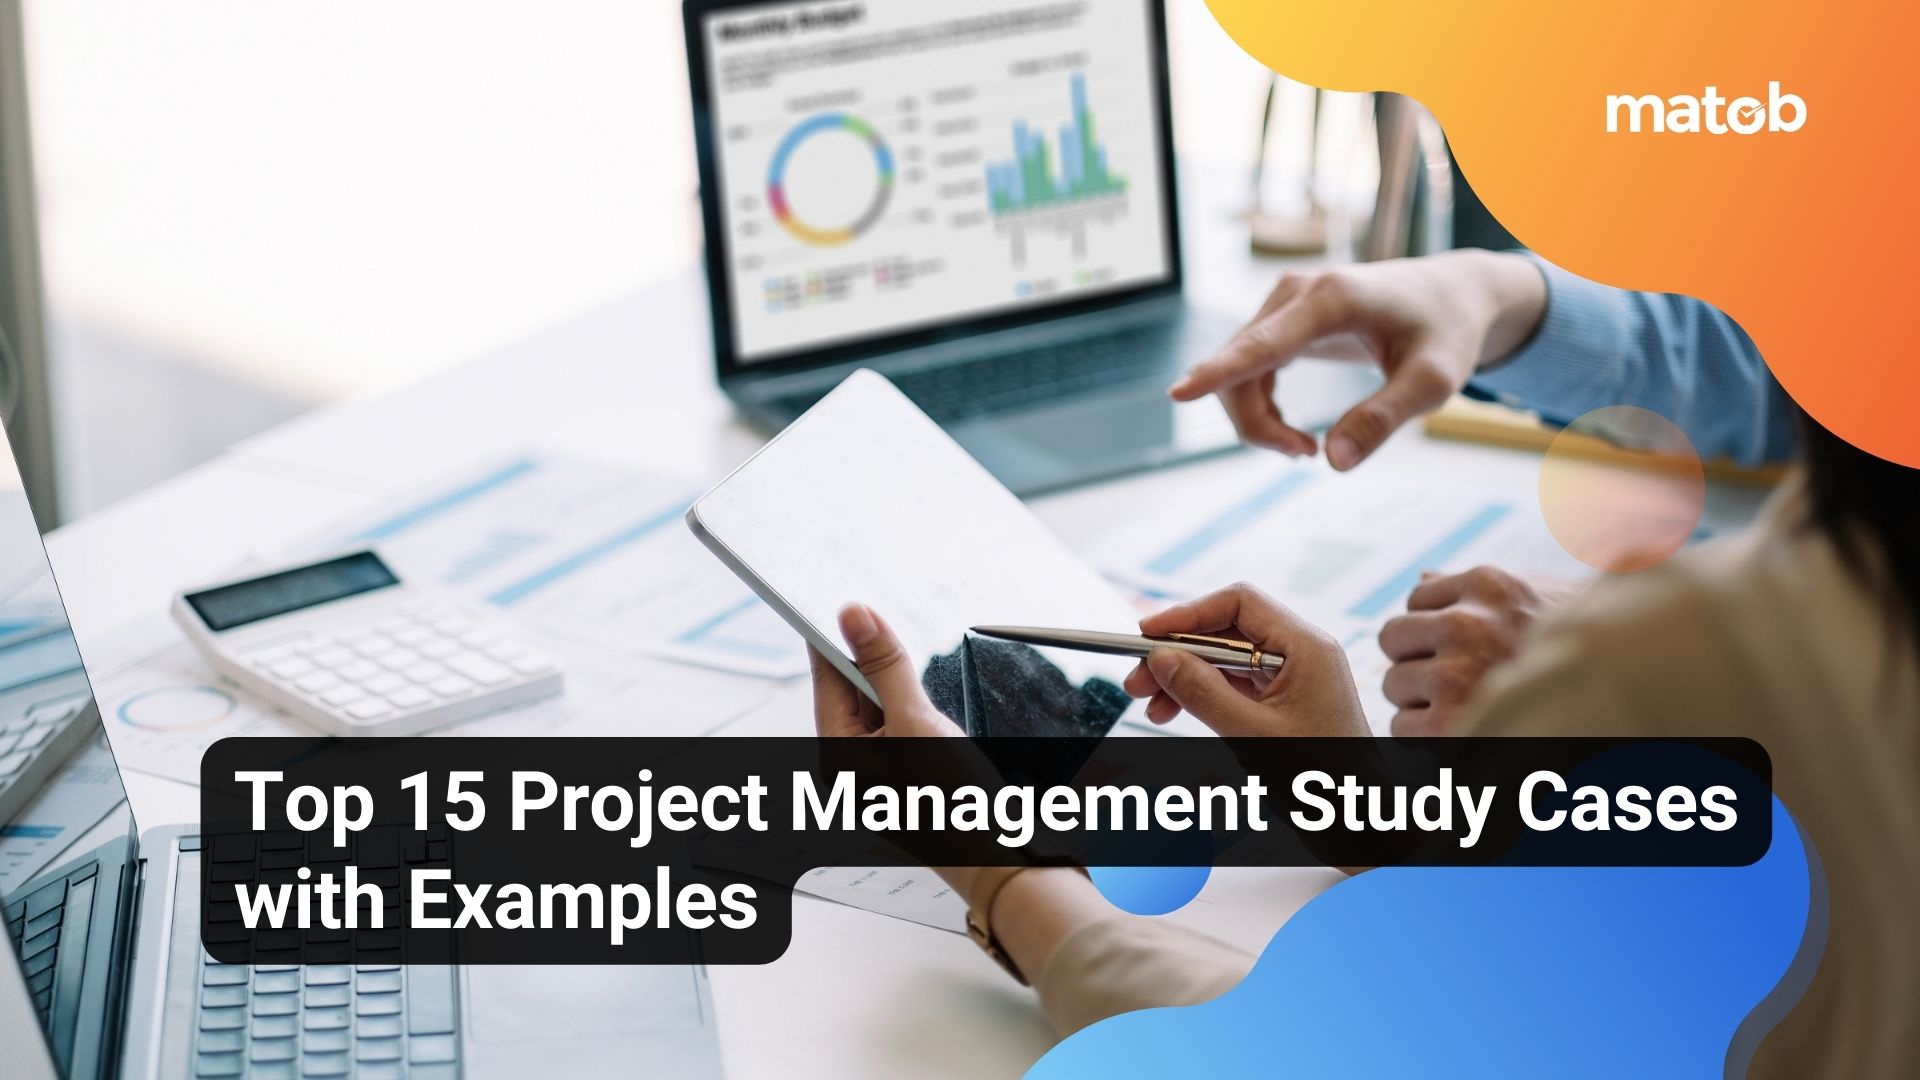 Top 15 Project Management Study Cases with Examples